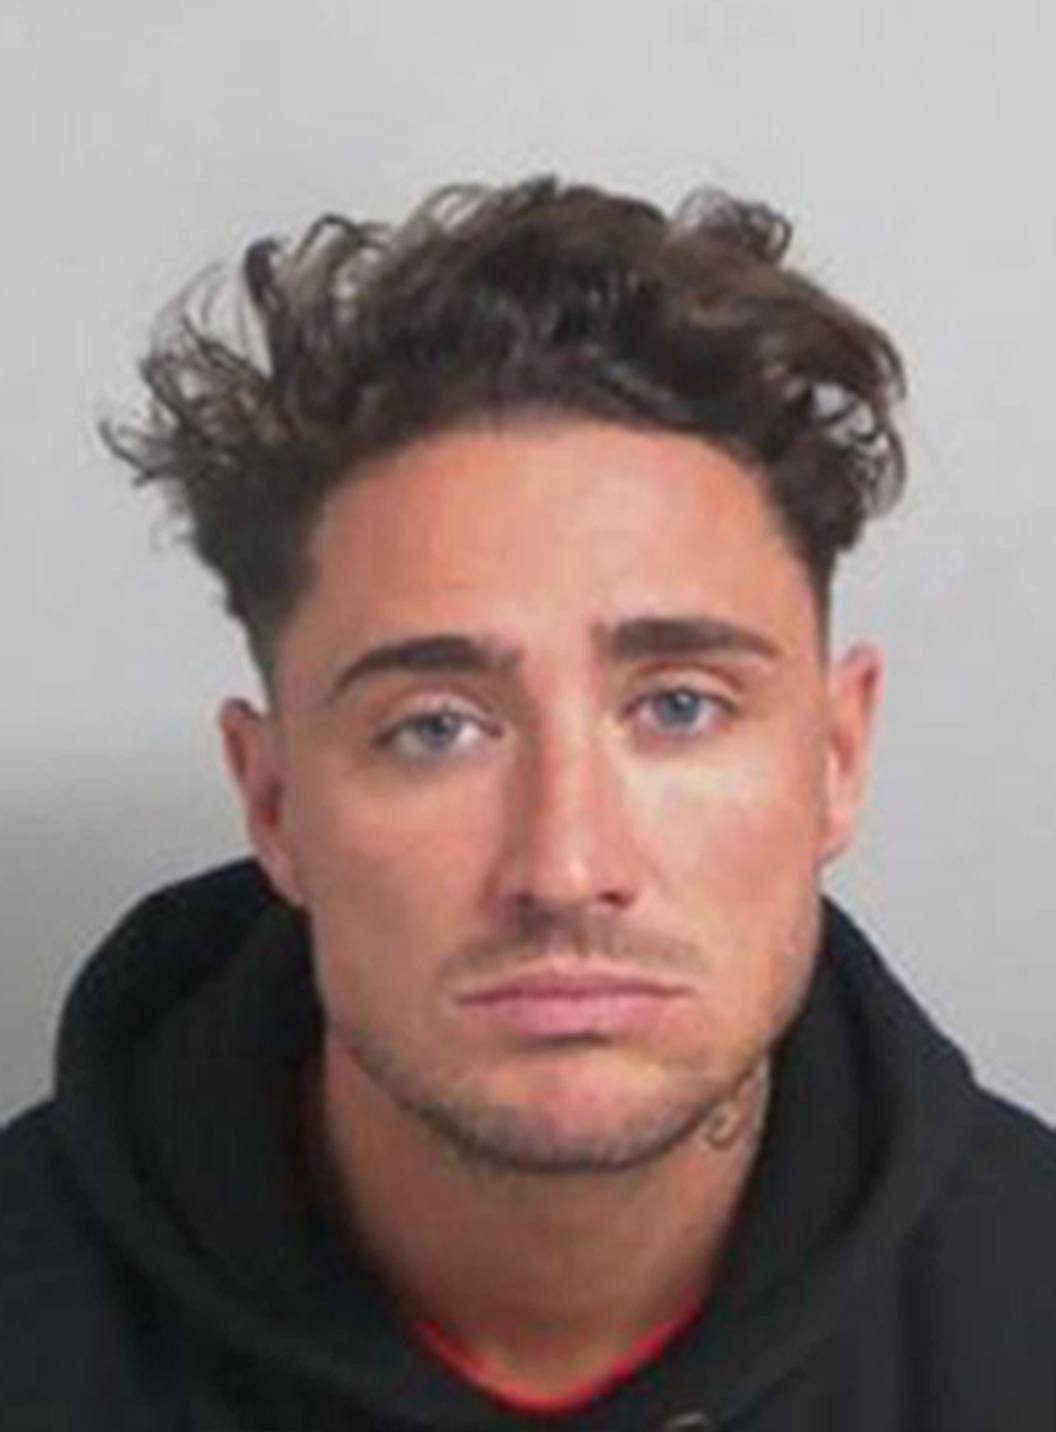 Crown Prosecution Service photo of reality TV star Stephen Bear who has been found guilty of disclosing private sexual photographs and films over a sex video of him and ex-girlfriend Georgia Harrison that was shared on the OnlyFans website.